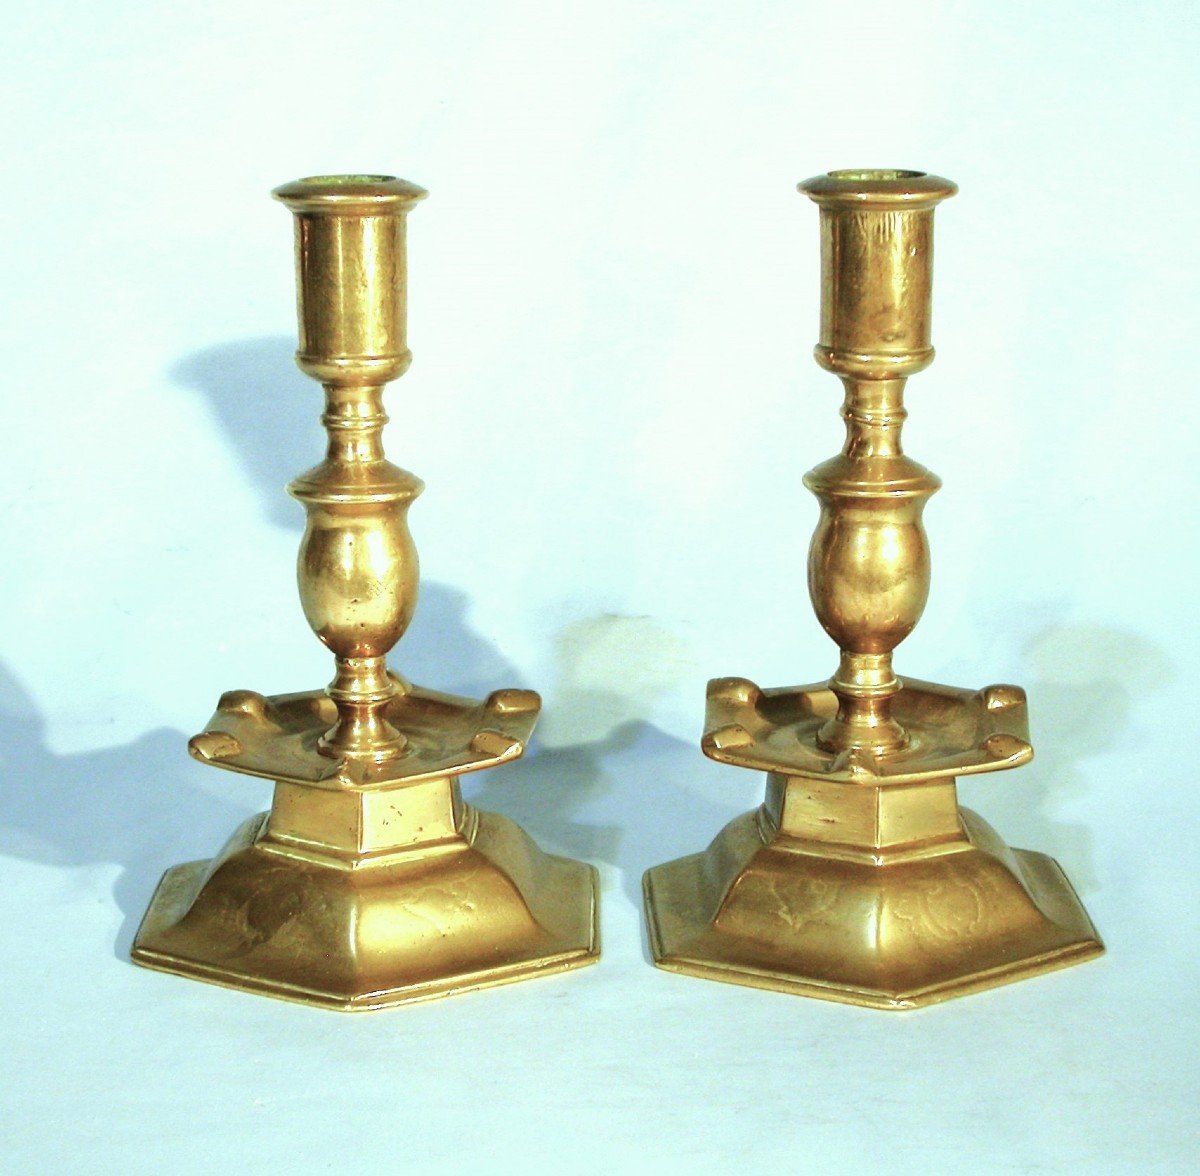 Rare Pair Of Bronze Torches - Early 17th Century